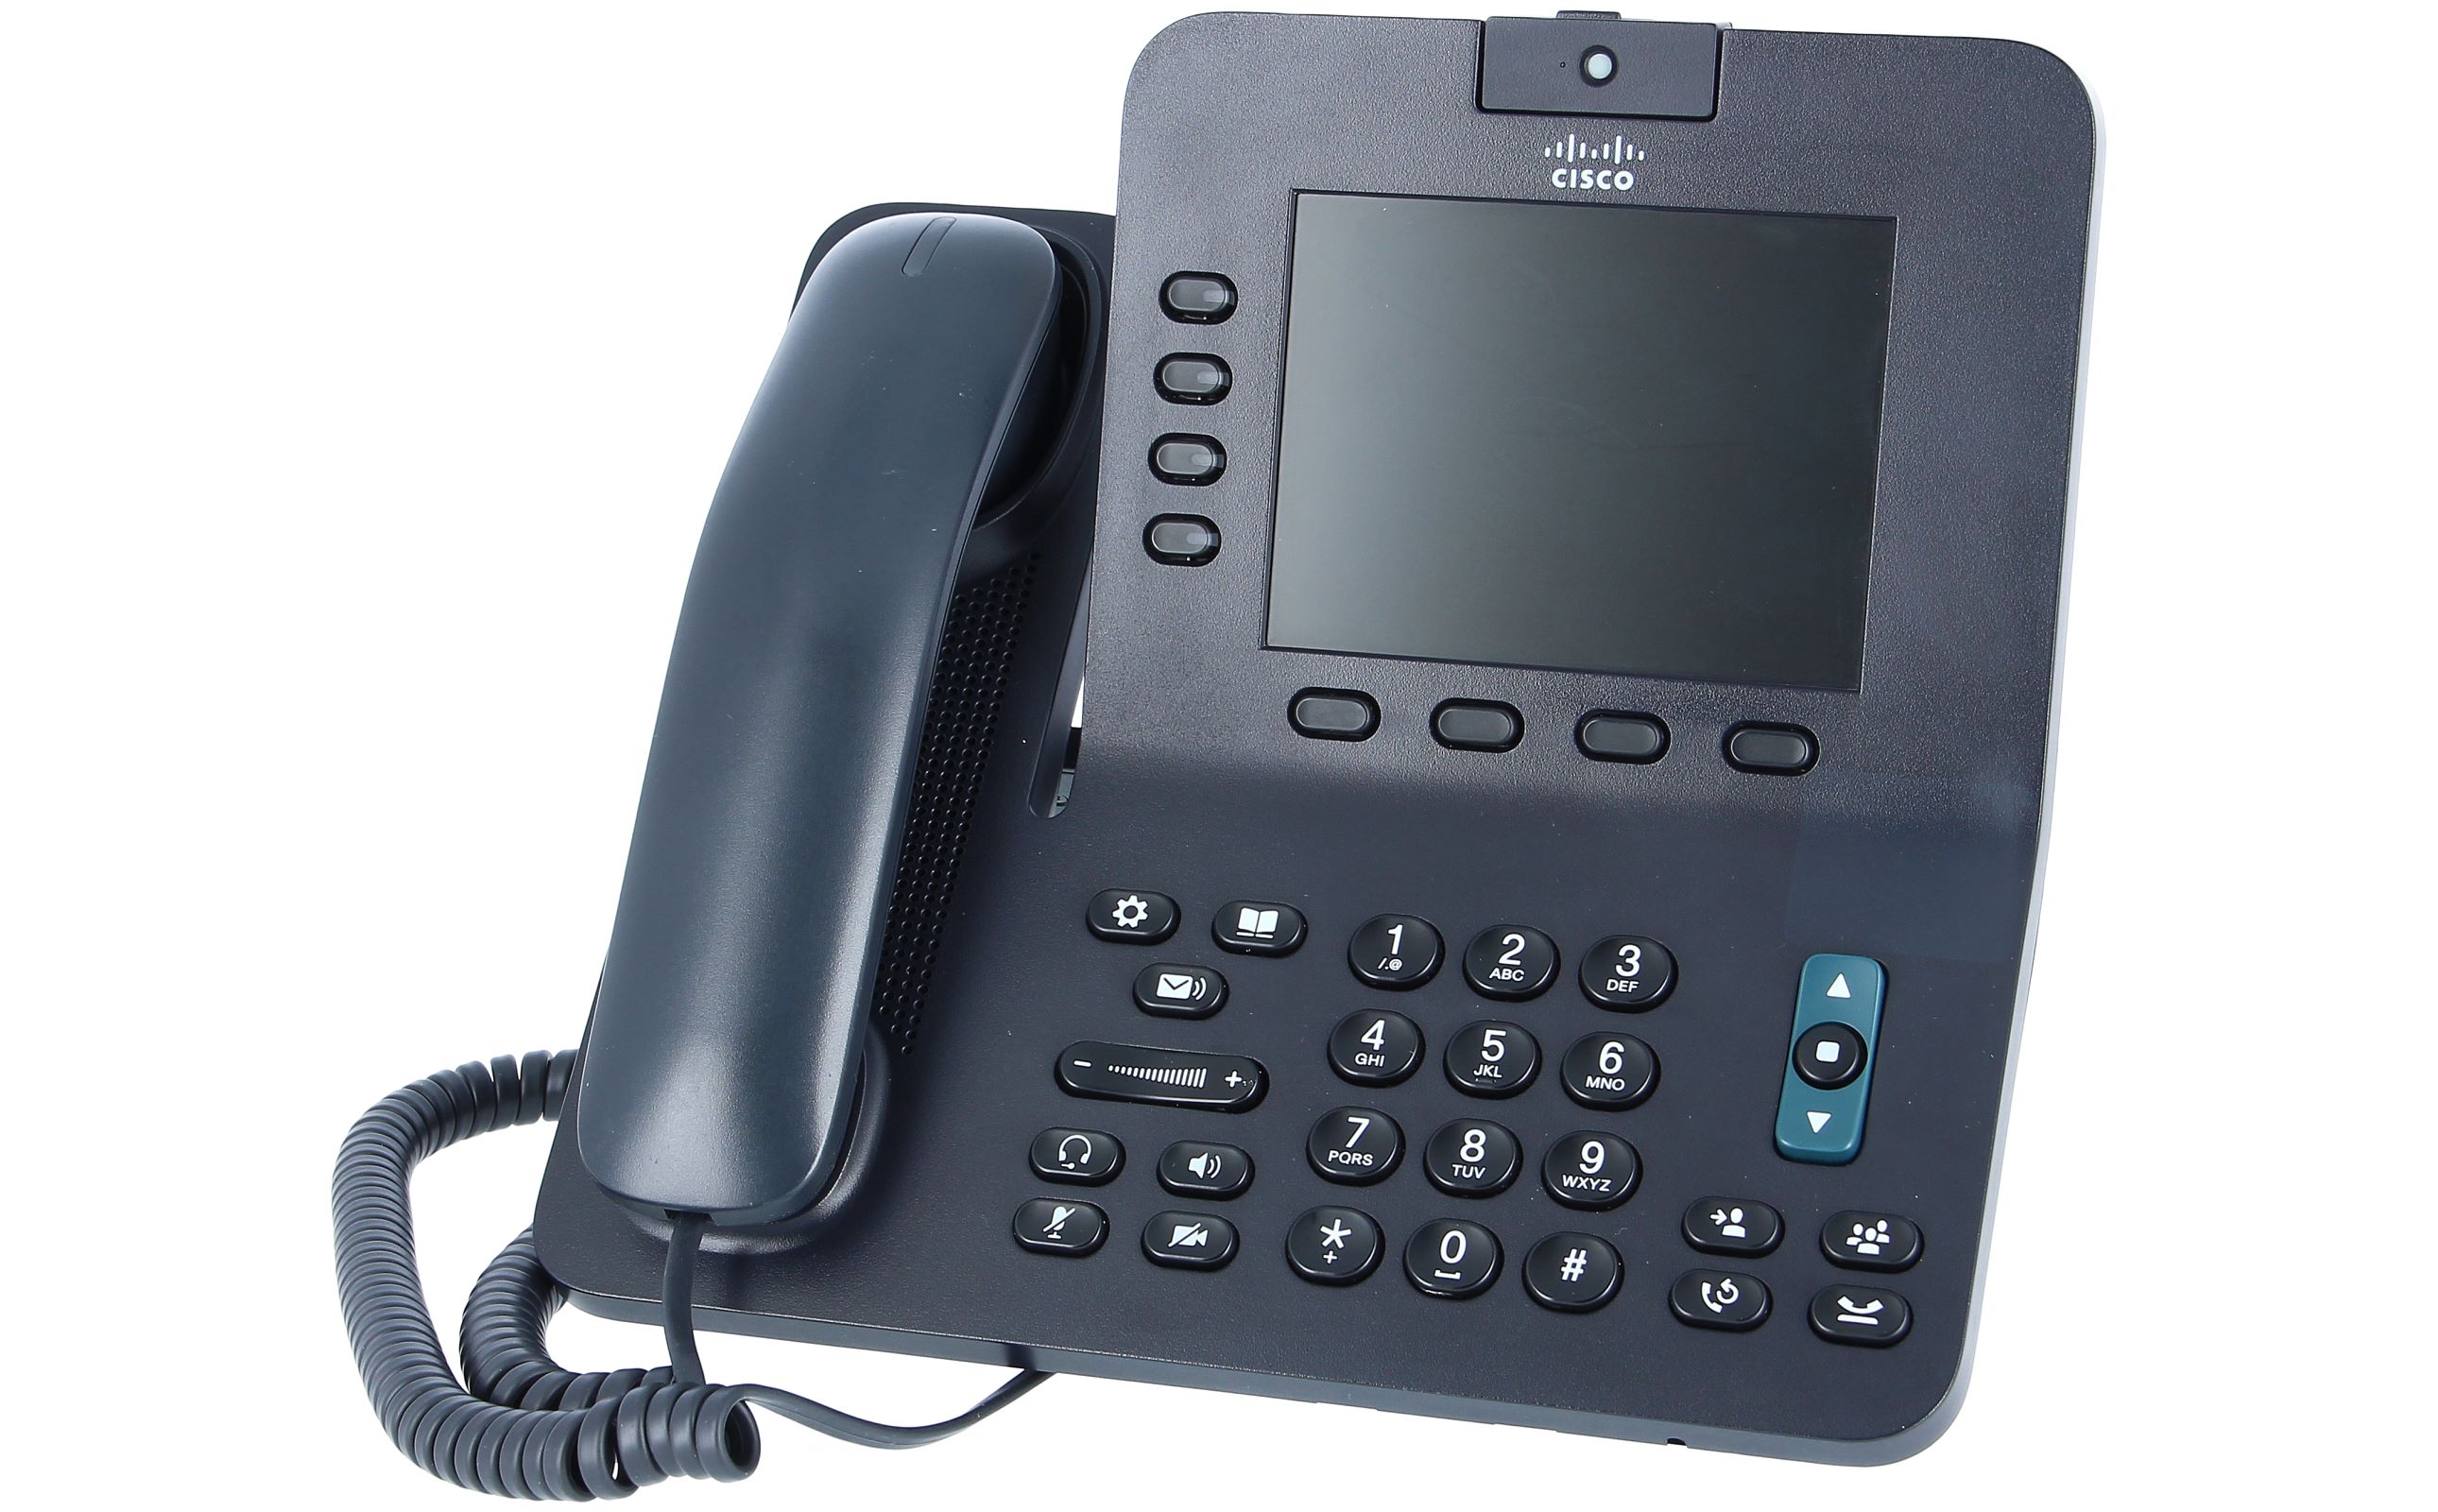 Cisco Cp-8945 IP VoIP Video Conference Phone for sale online 